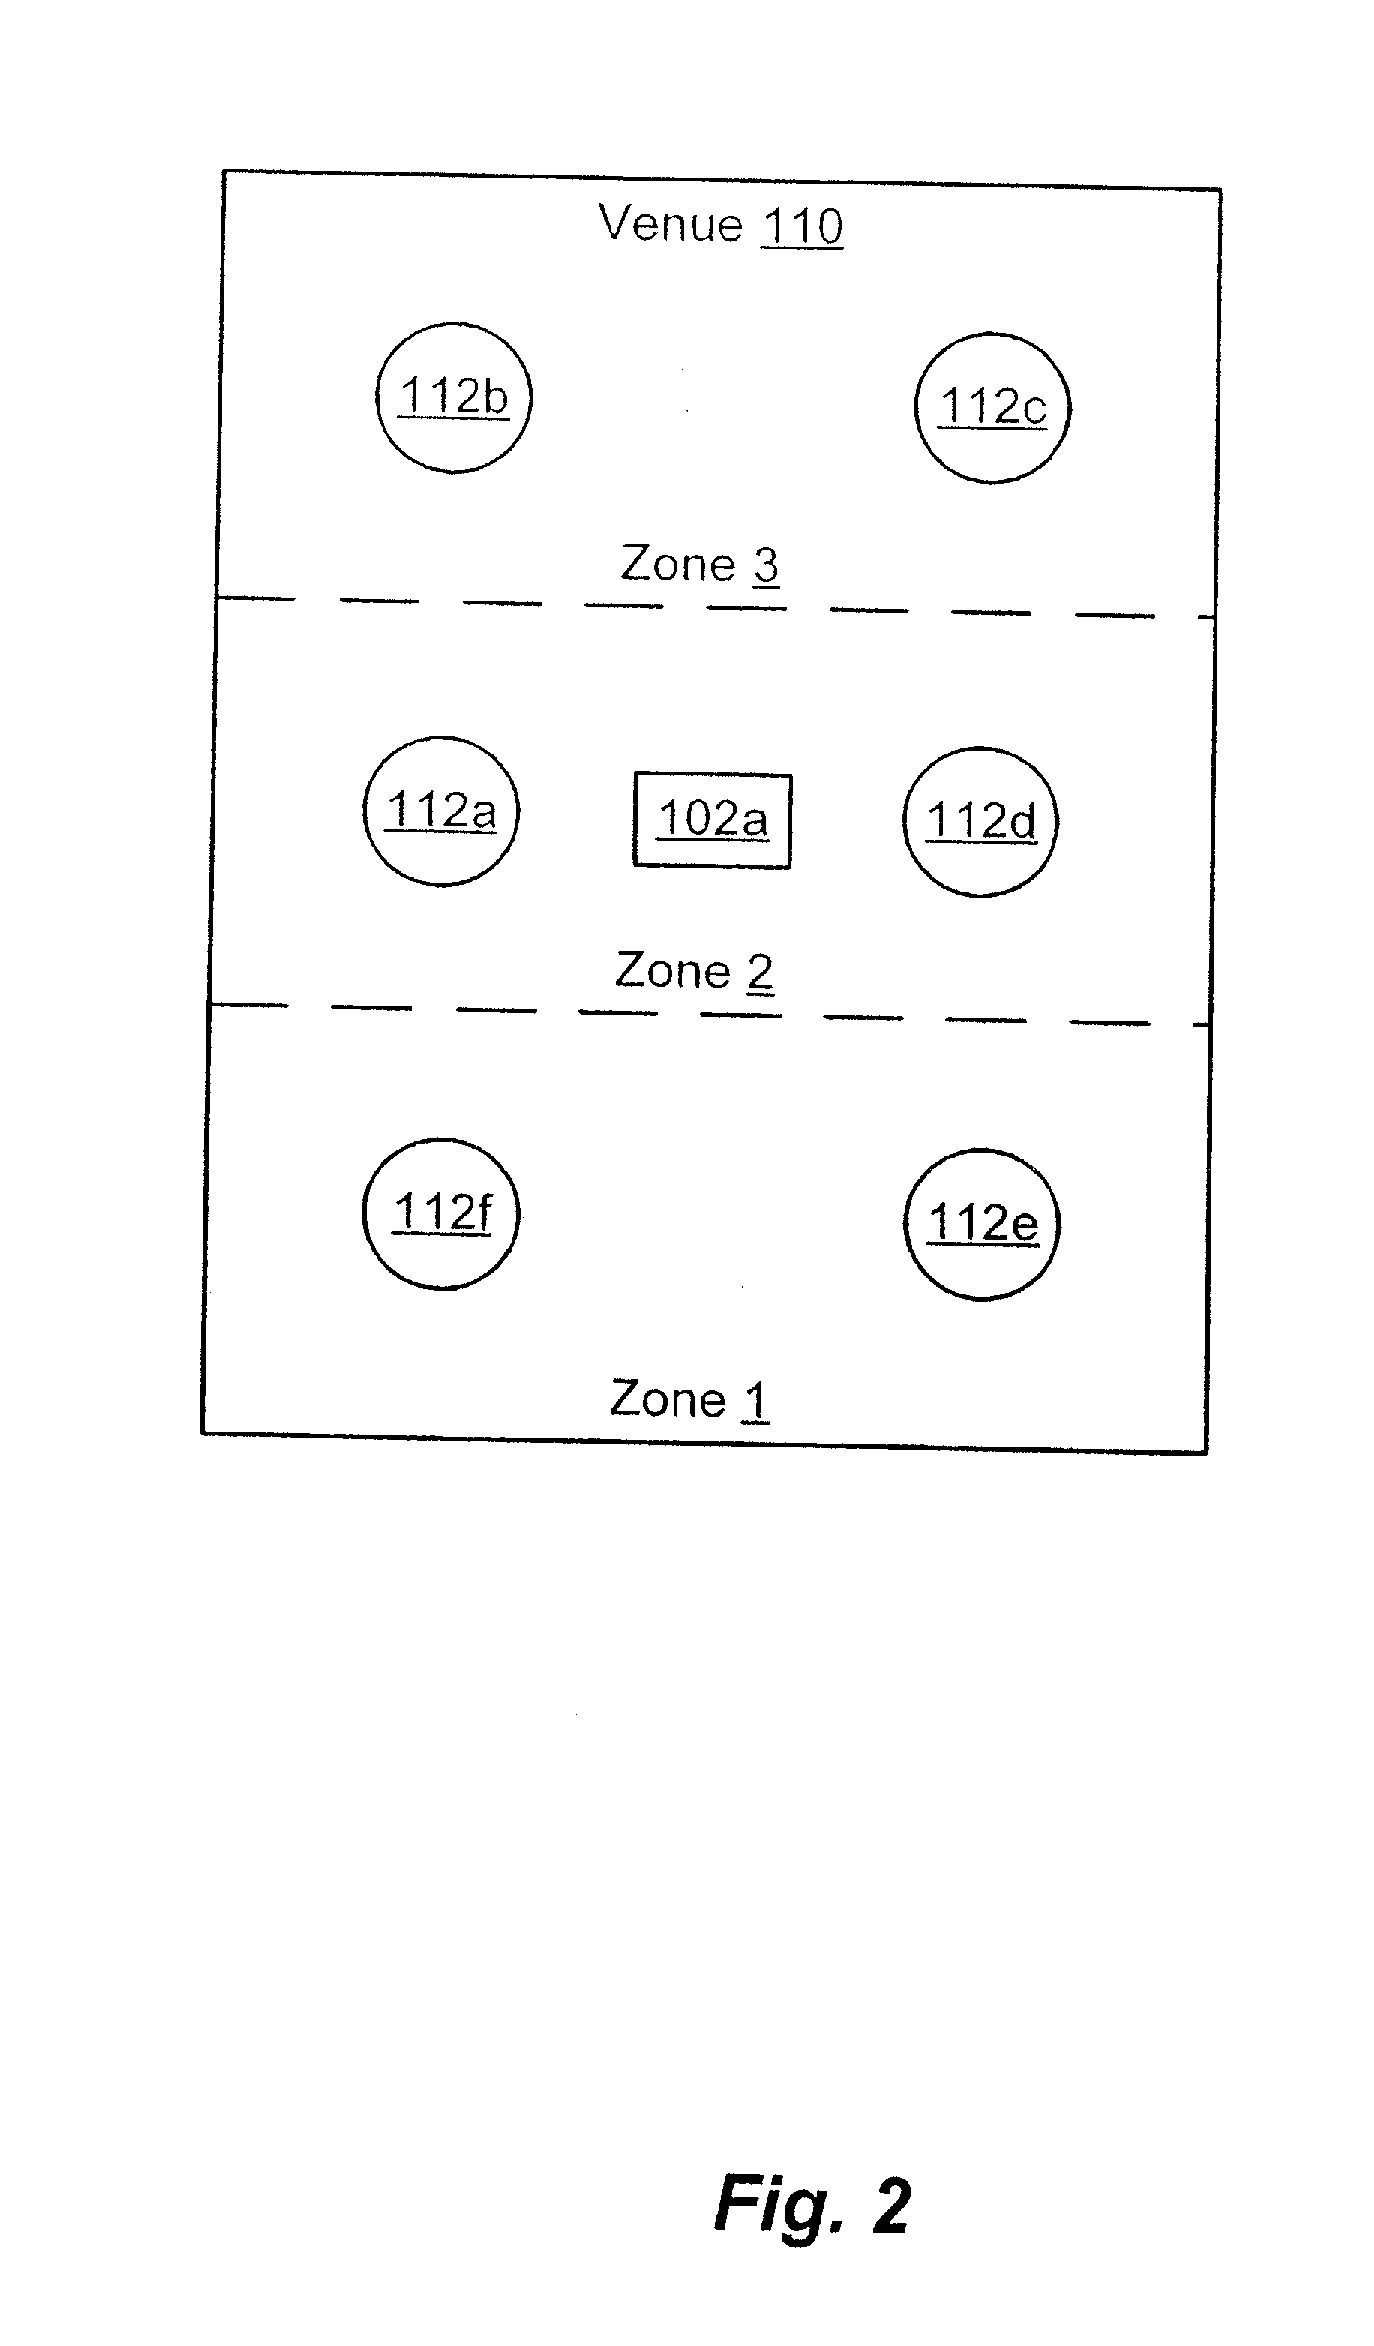 Distributed emitter voice lift system